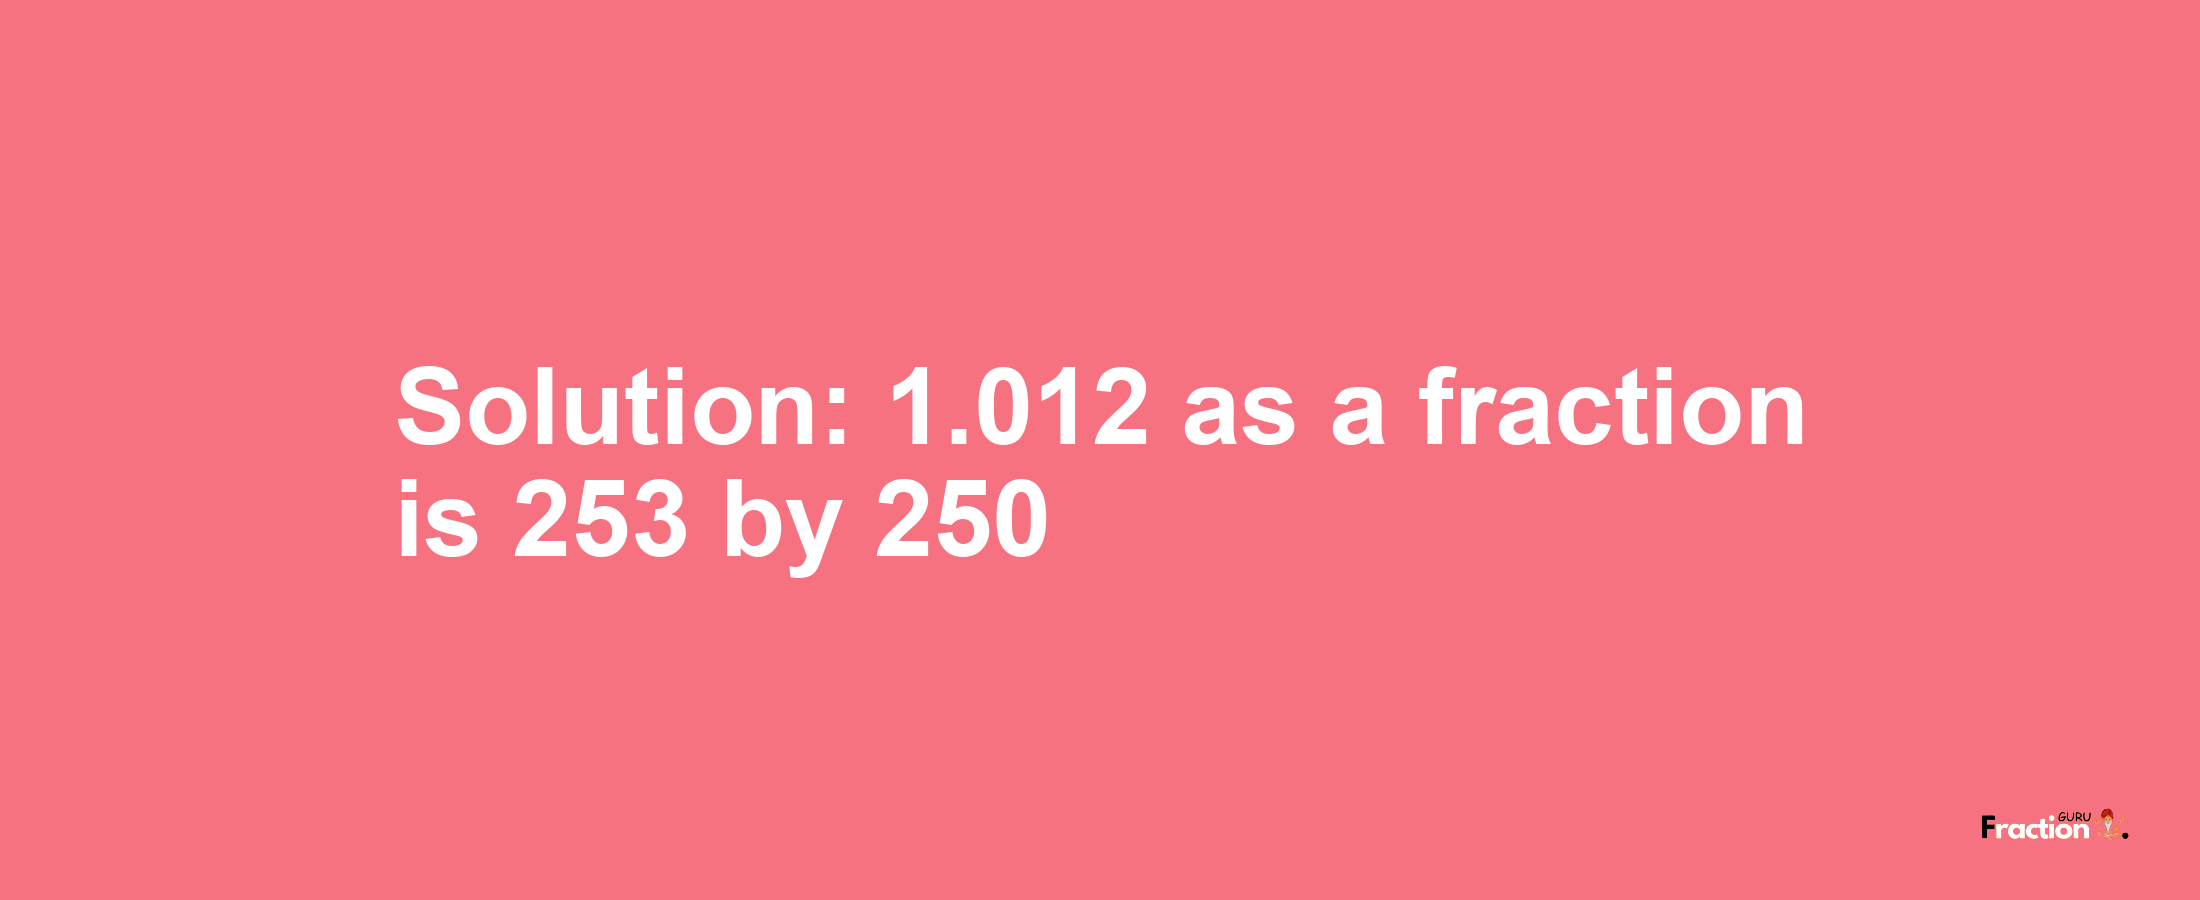 Solution:1.012 as a fraction is 253/250